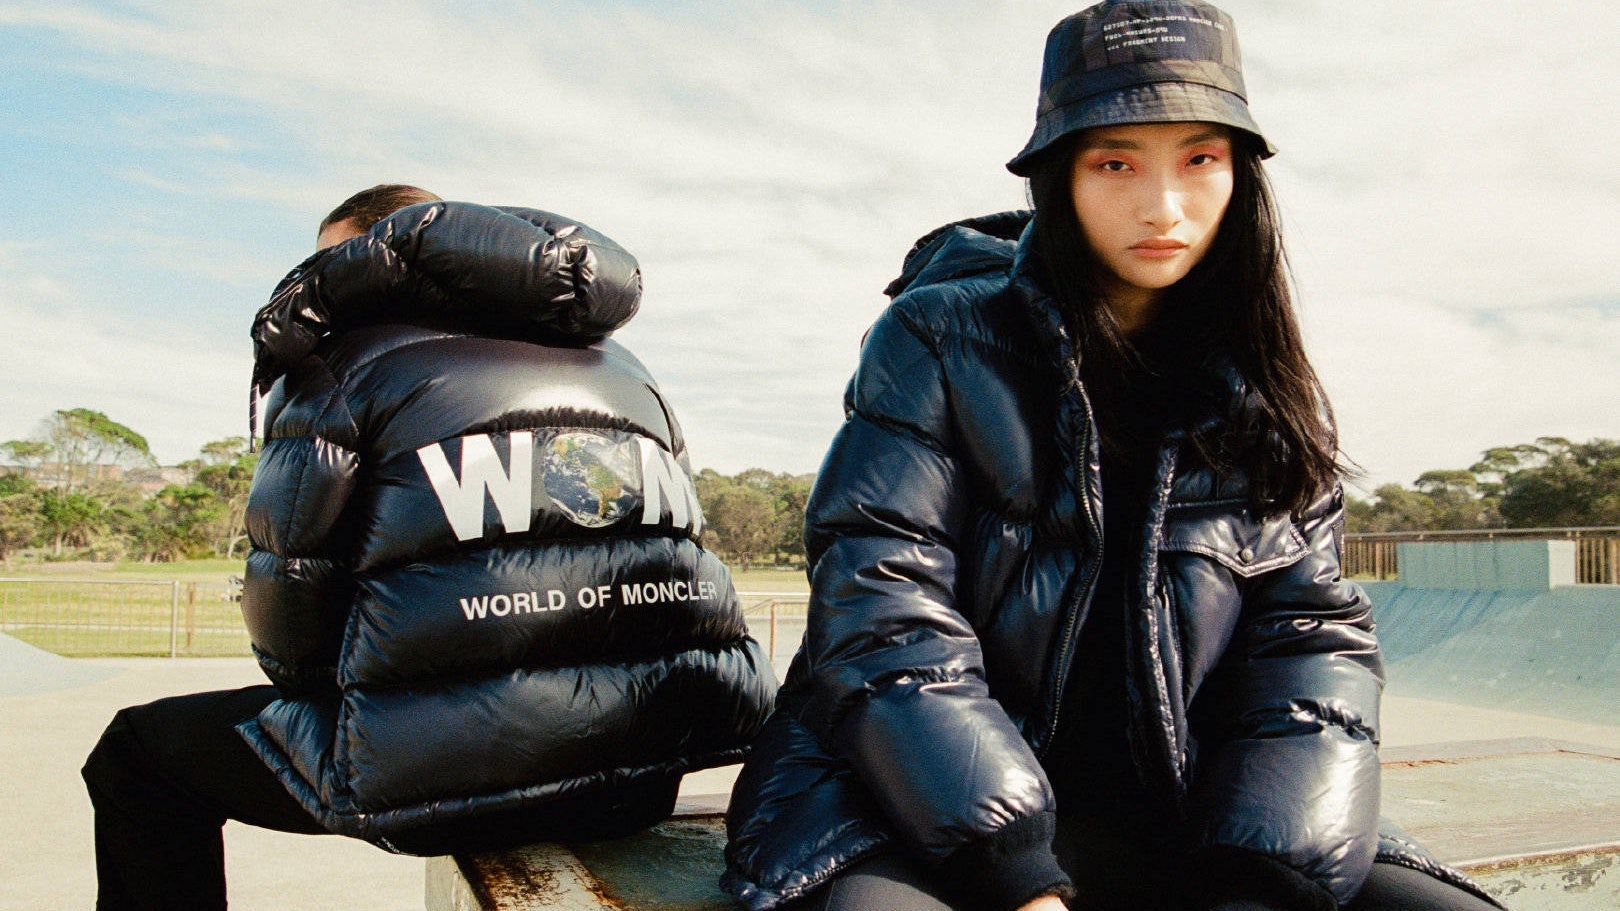 Consolidating Stone Island’s results for the first time, Moncler saw its group revenue jump 57 percent to $736 million in H1 2021.